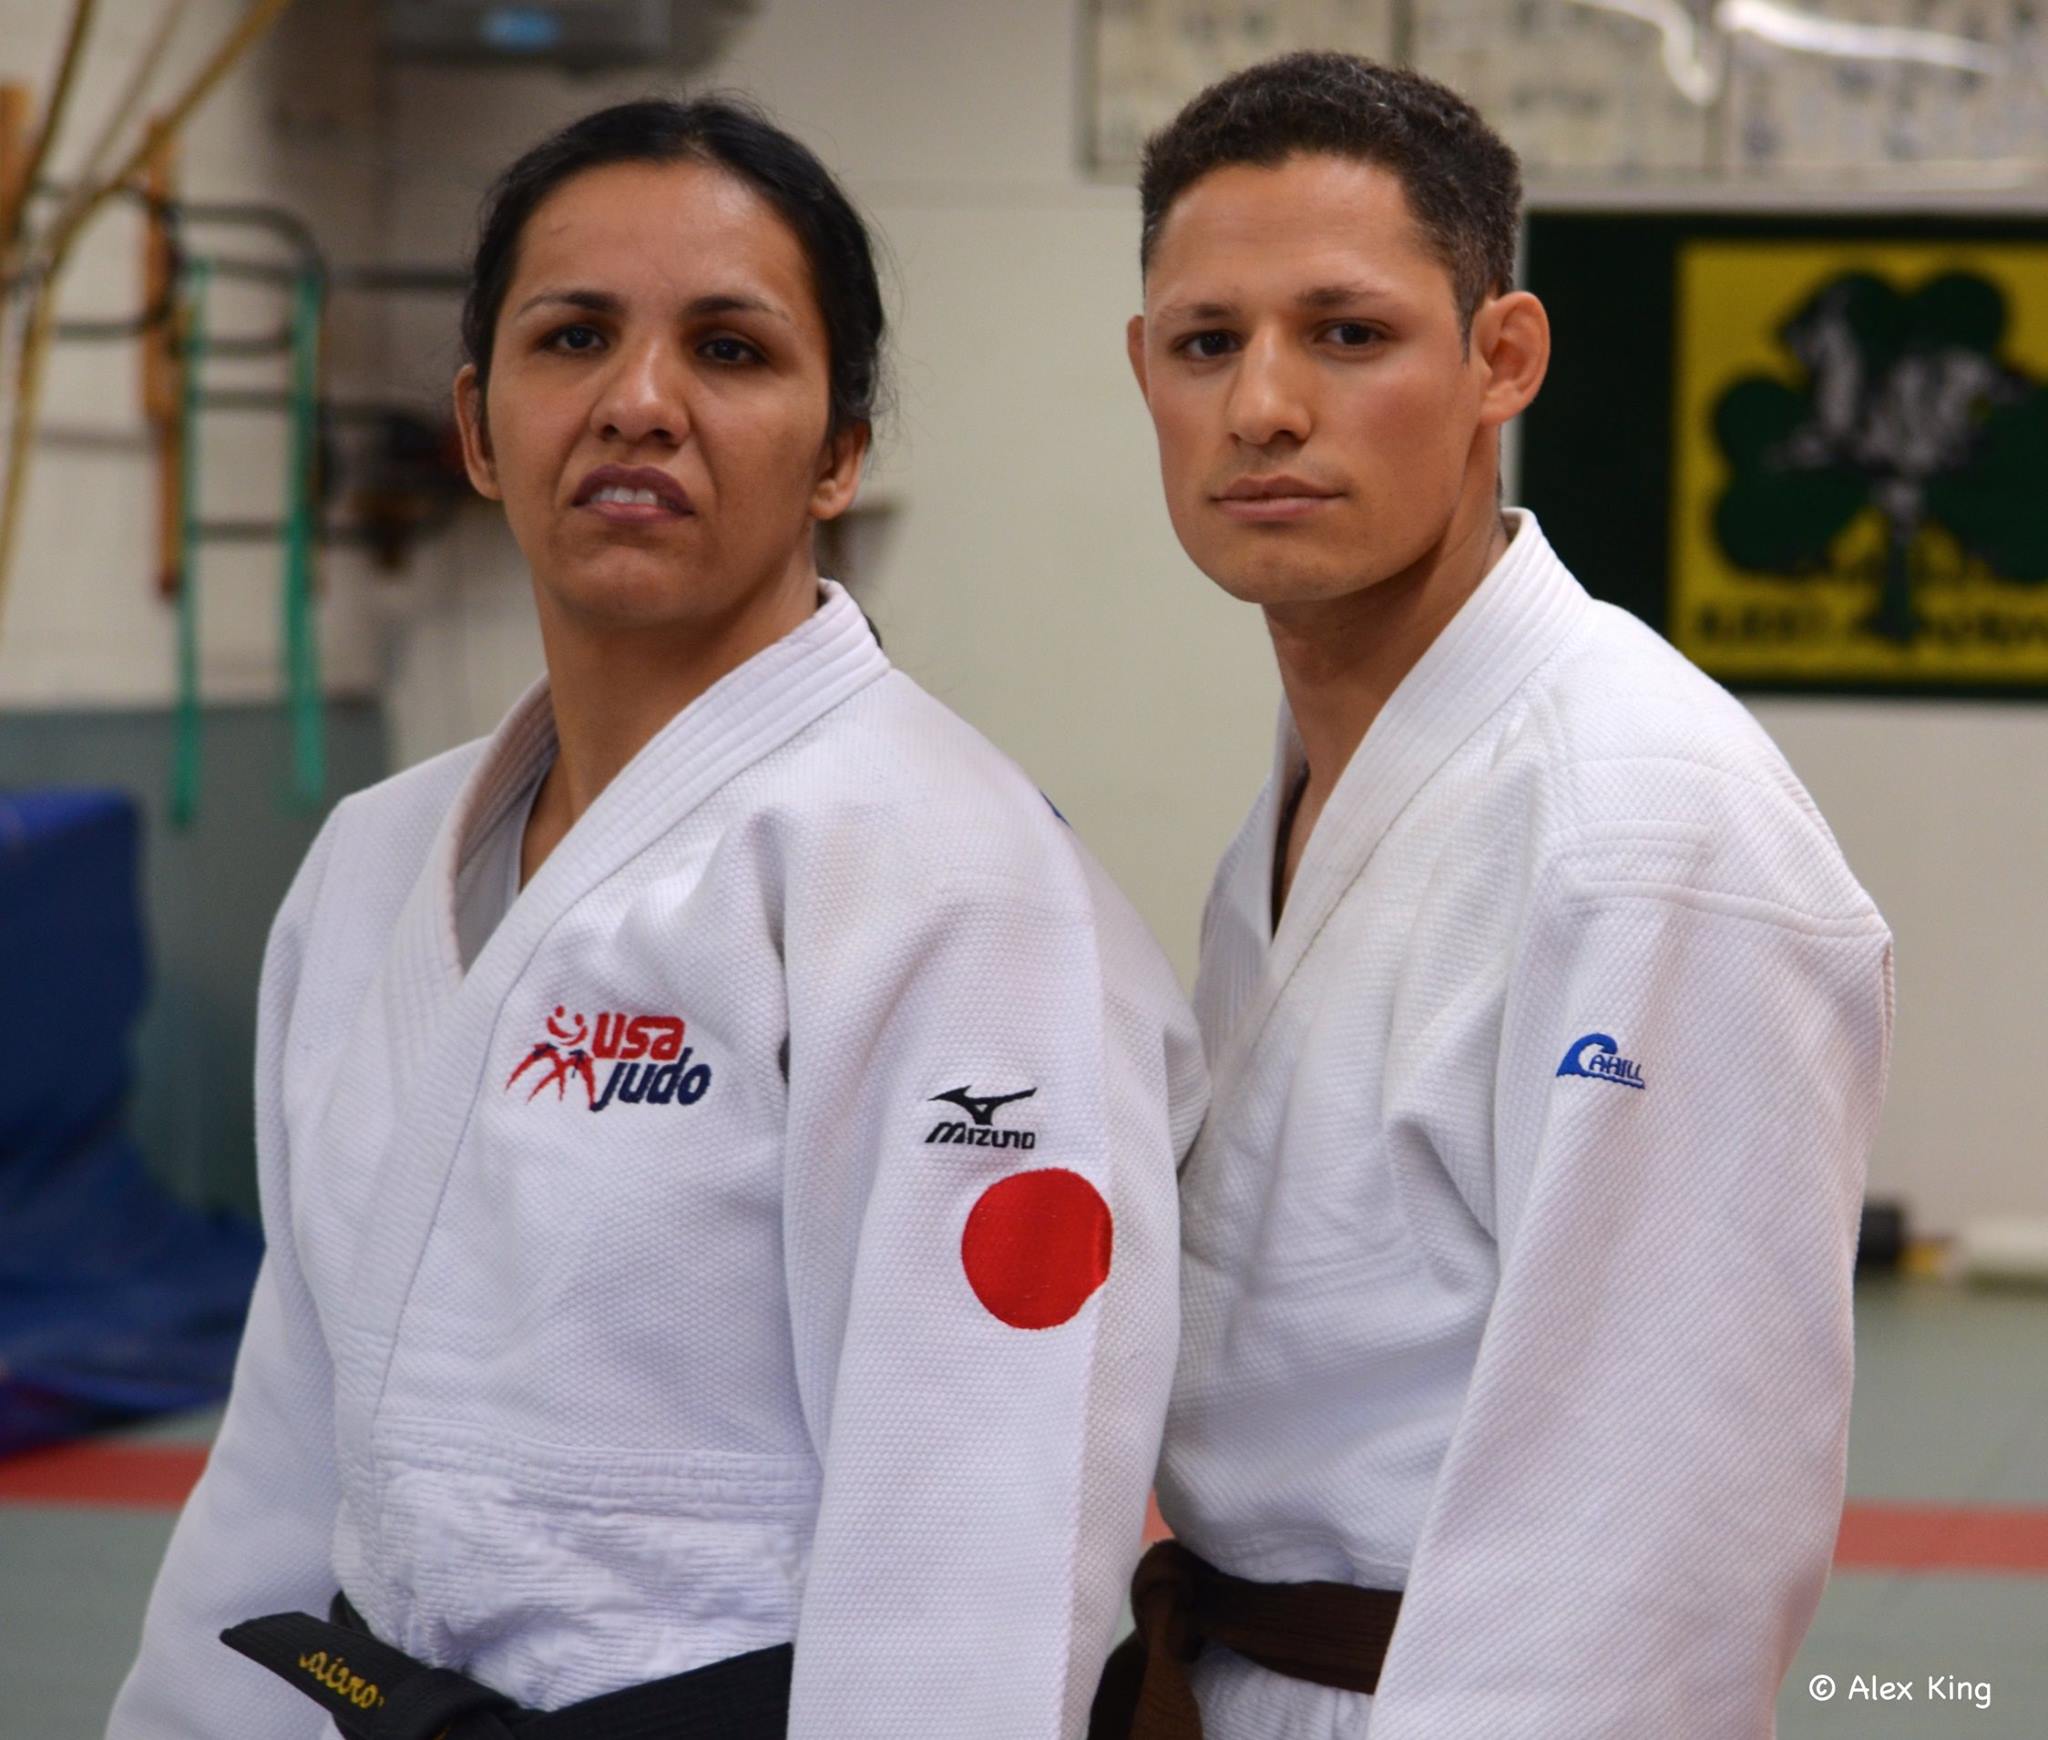 Christella Garcia working out with Alex King (Sighted Judoka) who took falls for Christella during training at Cahill's Judo Academy preceding her winning the Gold Medal at the Judo Nationals